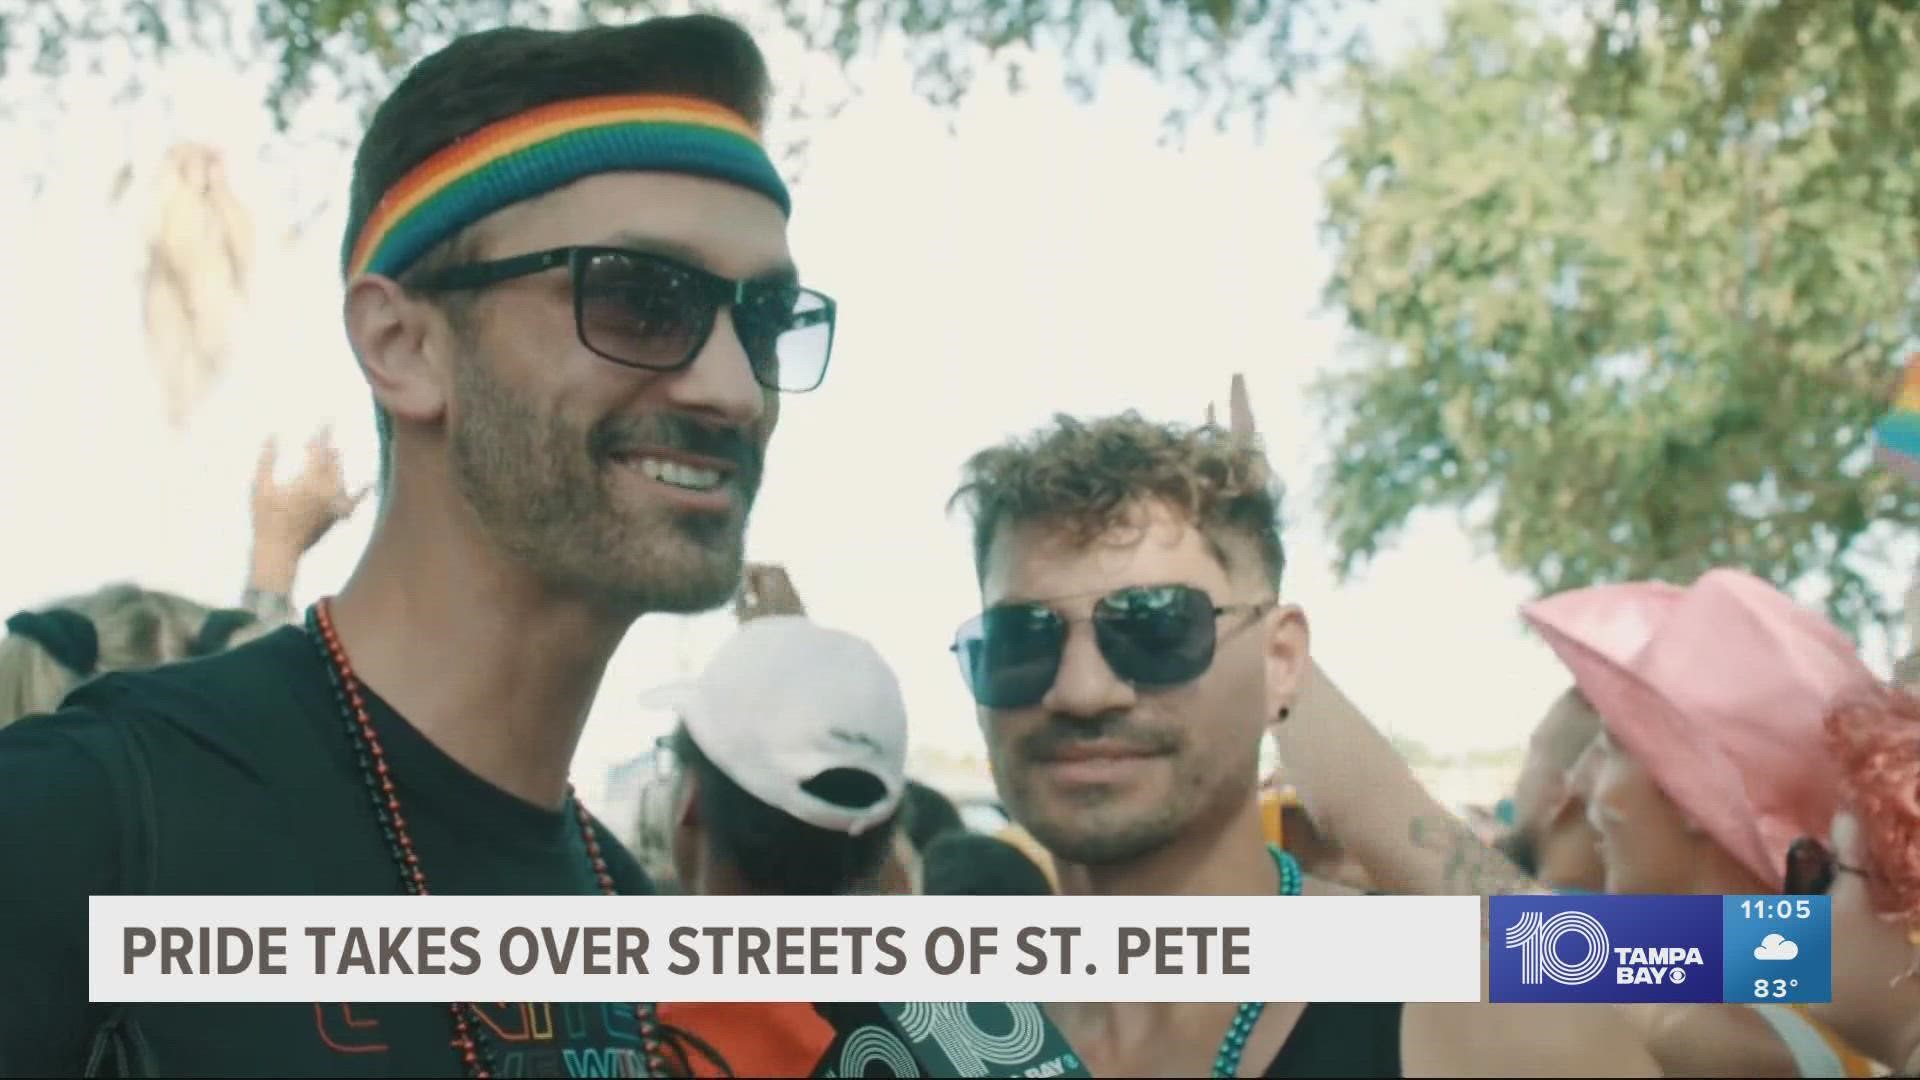 More than 300,000 people are expected to attend weekend Pride events in the city.